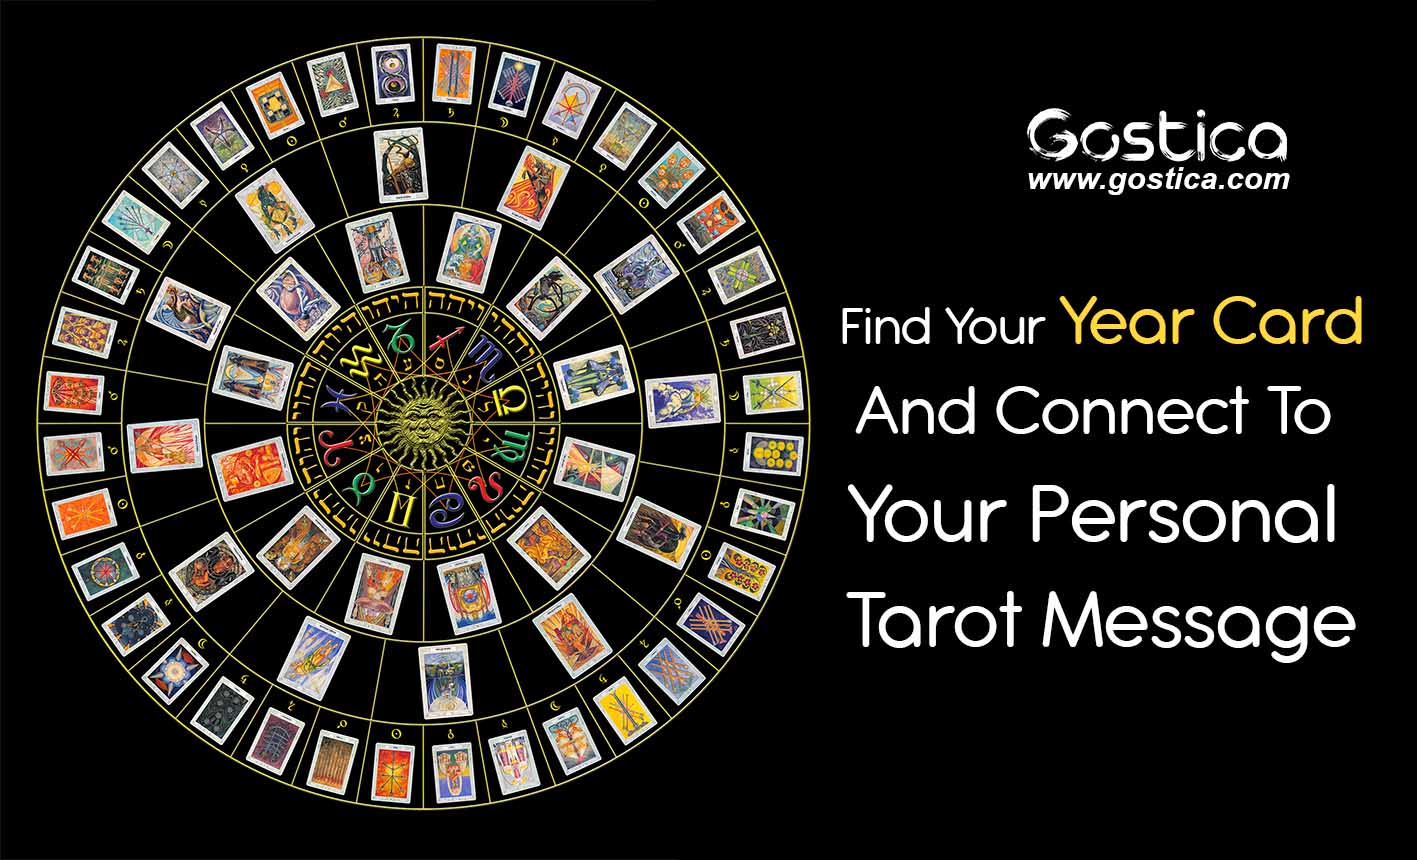 Find-Your-Year-Card-And-Connect-To-Your-Personal-Tarot-Message.jpg